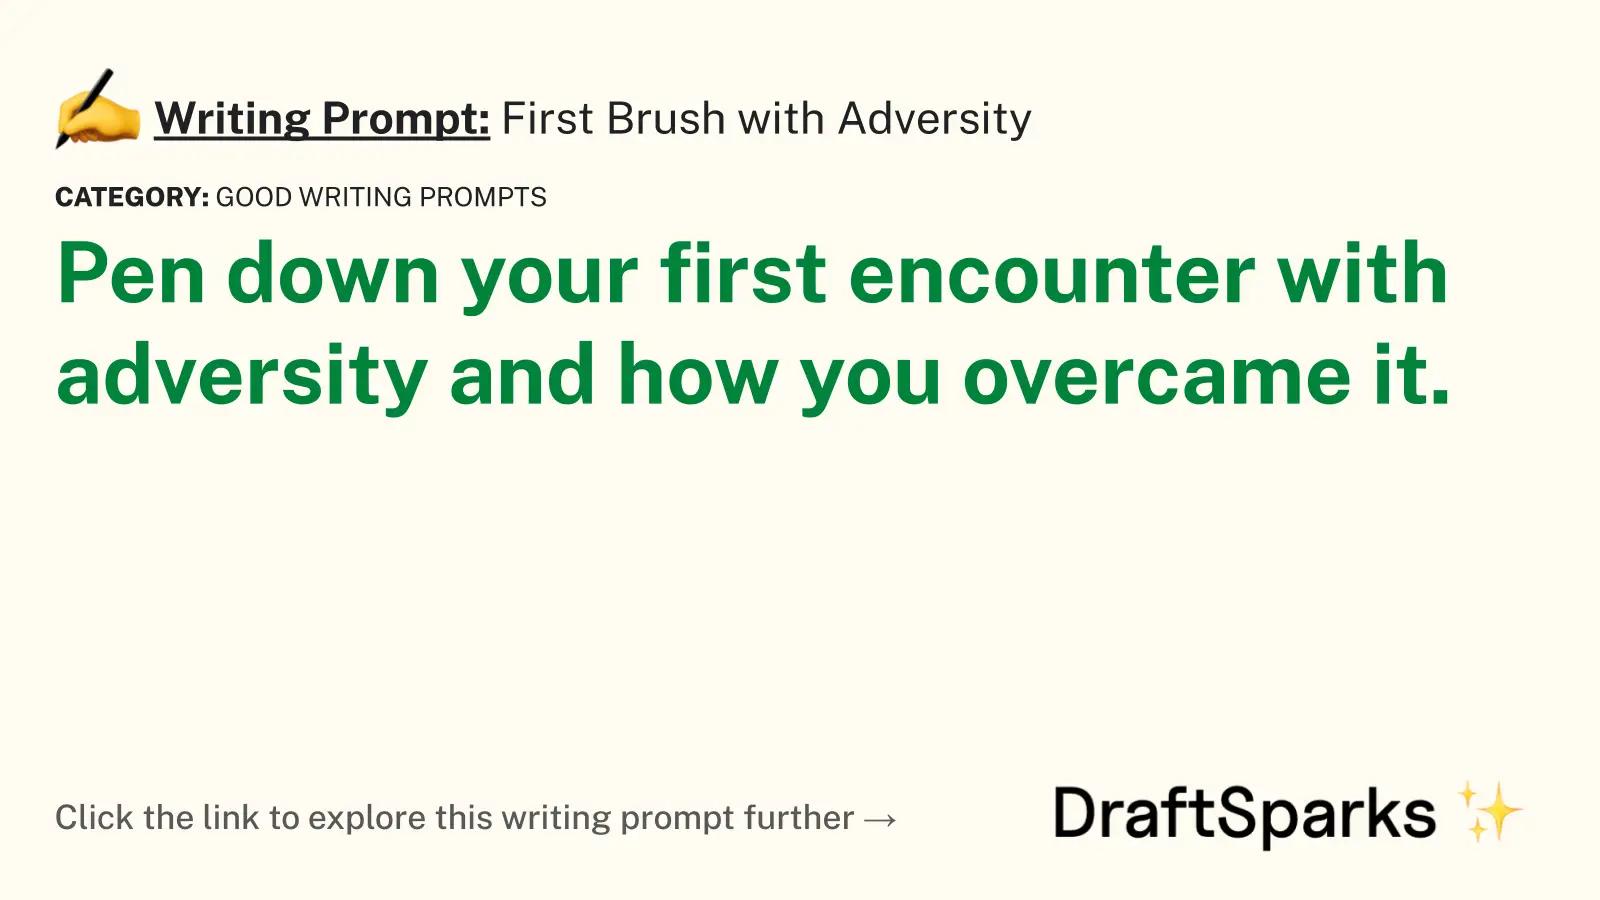 First Brush with Adversity